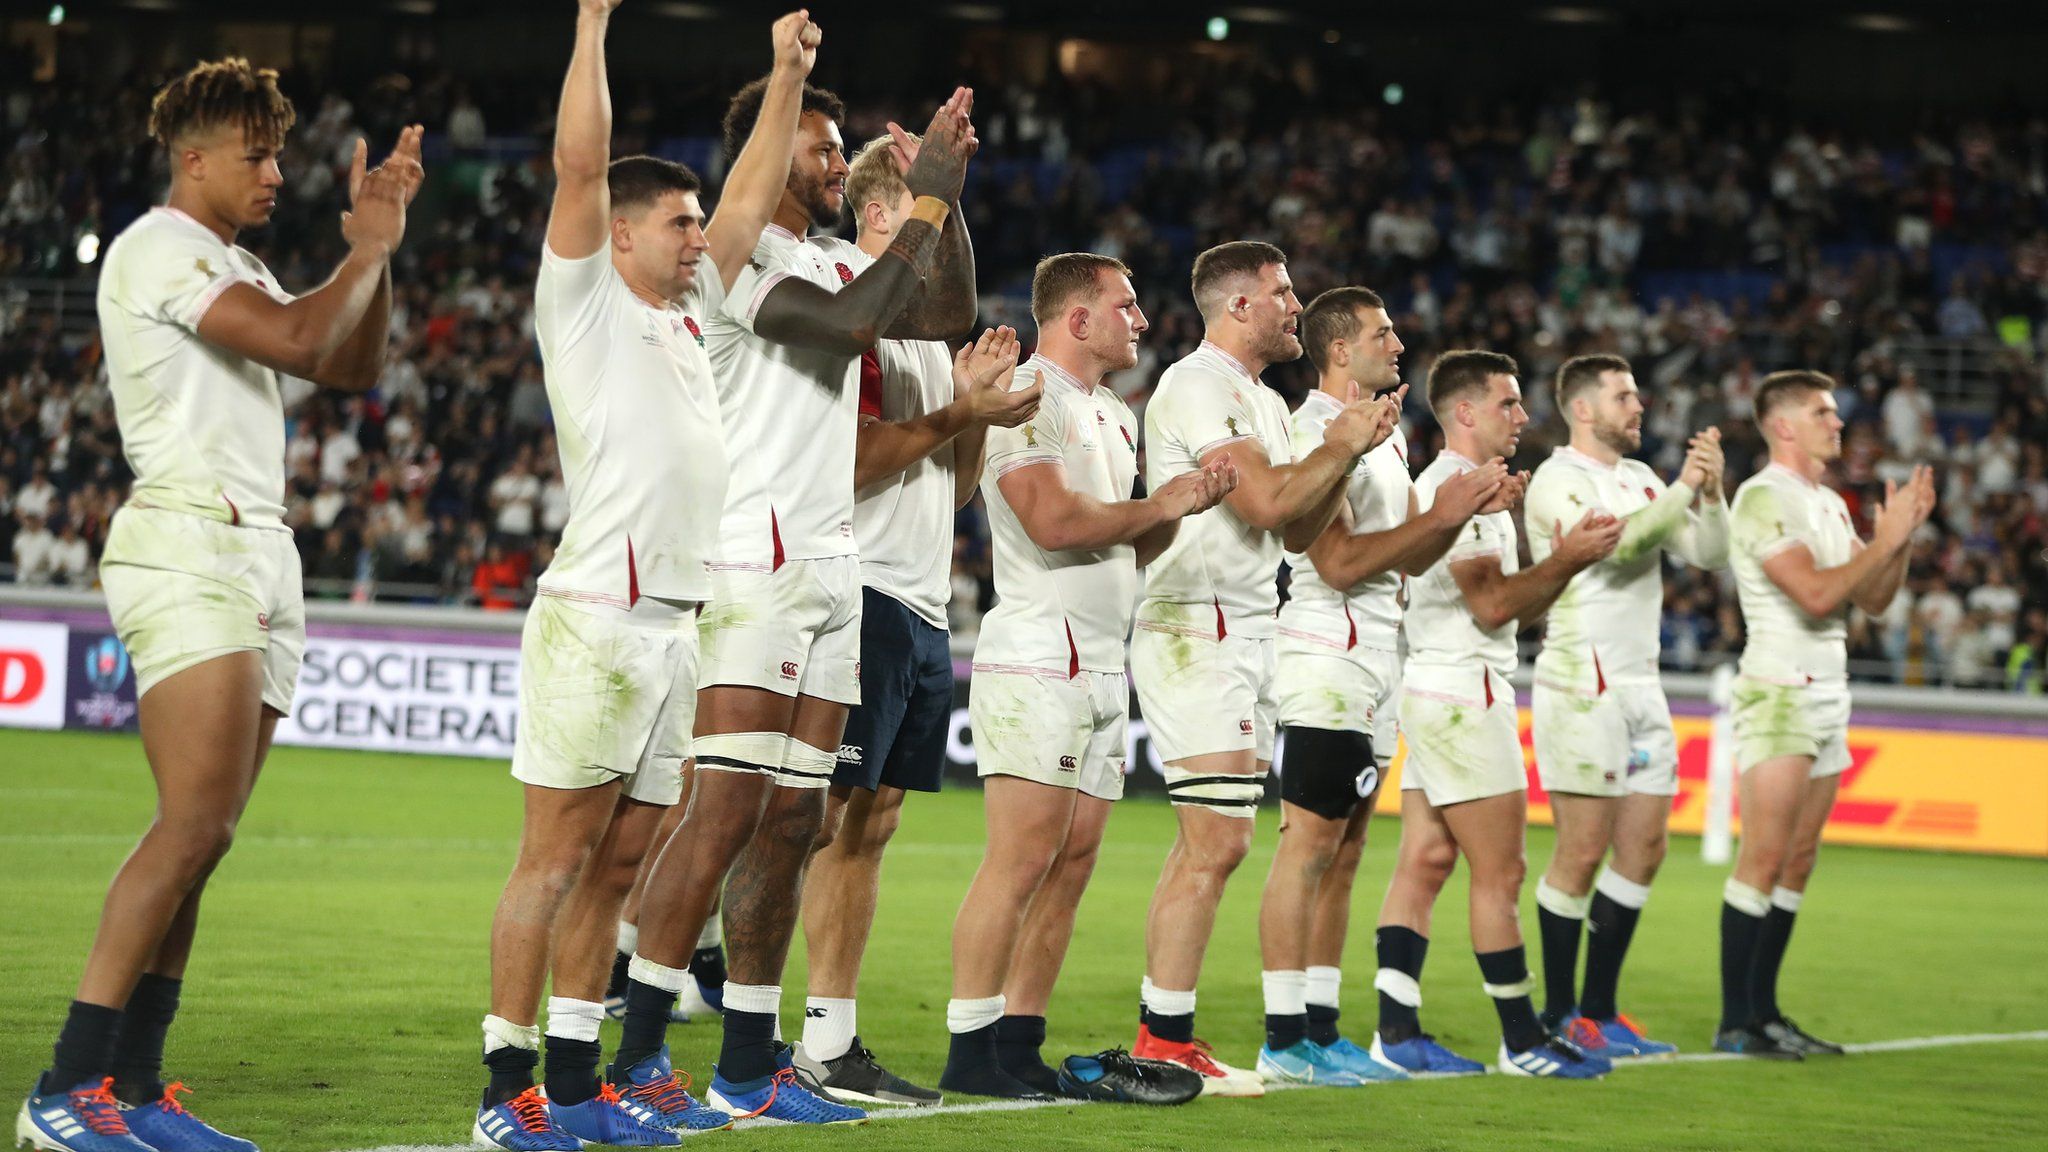 England players celebrating after the win against New Zealand in the World Cup semi-final